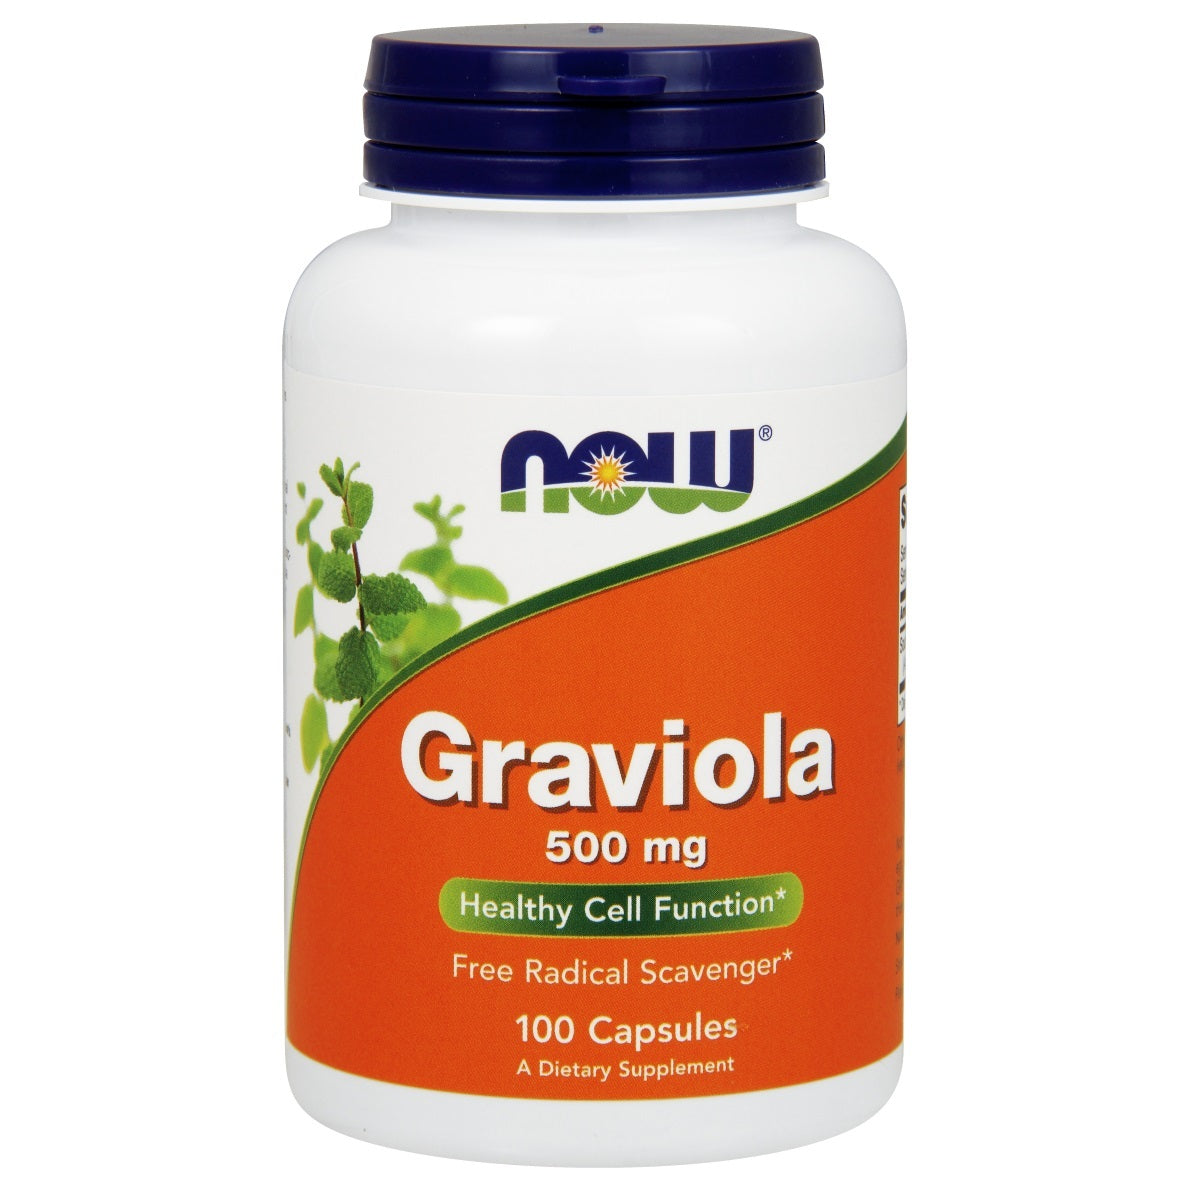 Primary image of Graviola Healthy Cell Support